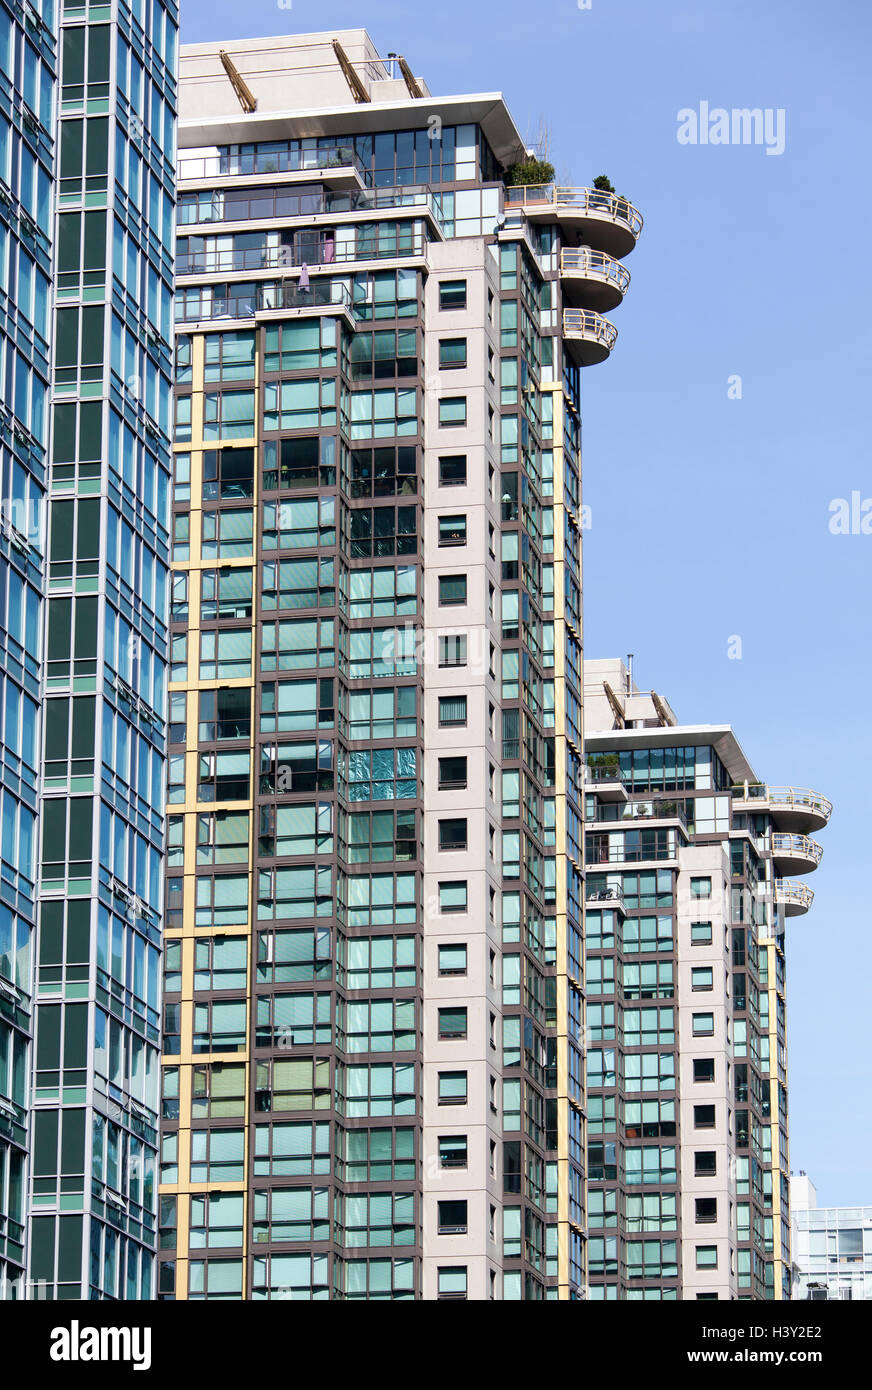 The row of modern apartment buildings in Vancouver (British Columbia). Stock Photo